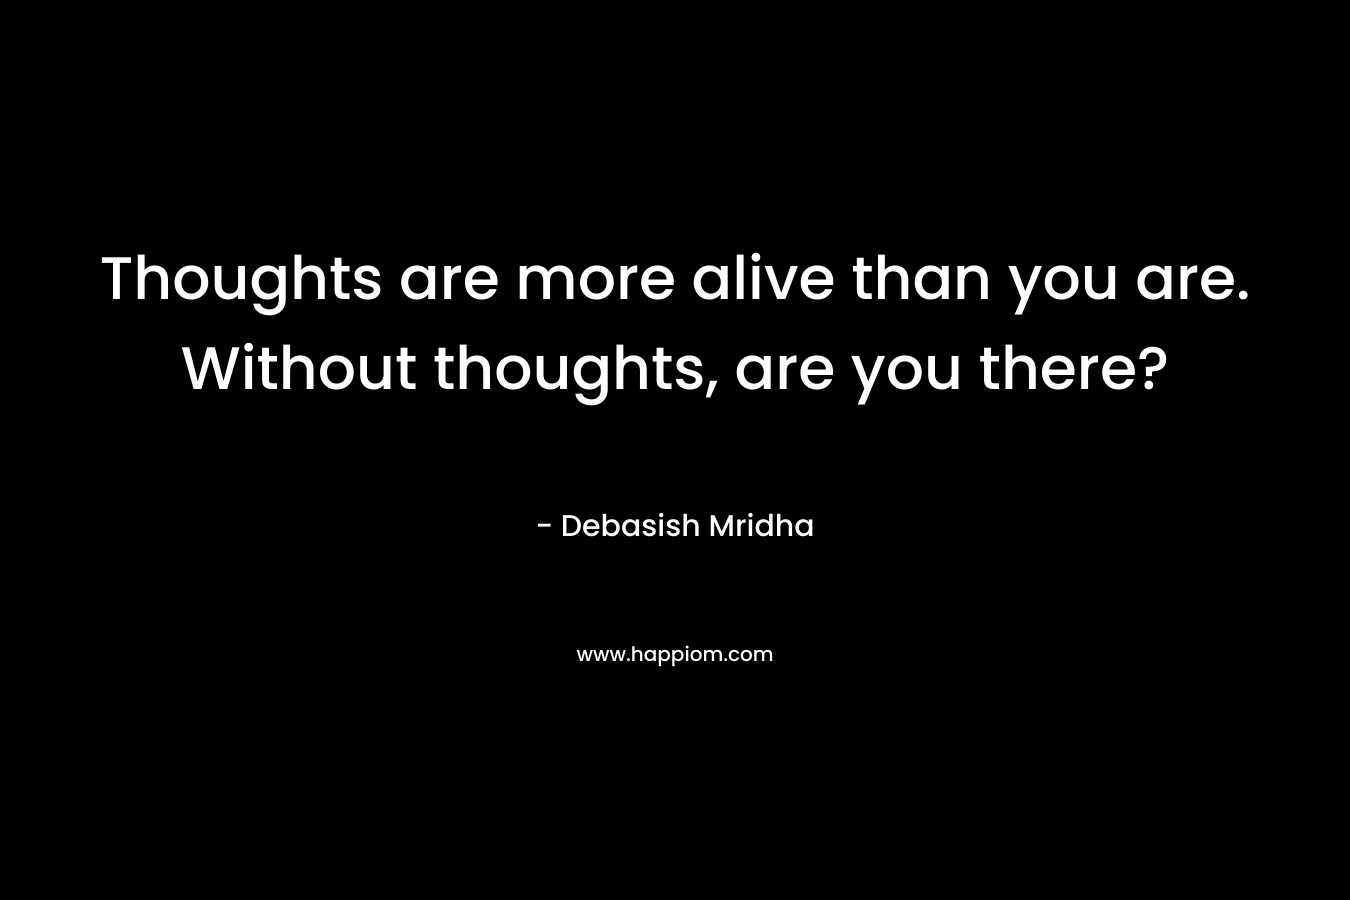 Thoughts are more alive than you are. Without thoughts, are you there?